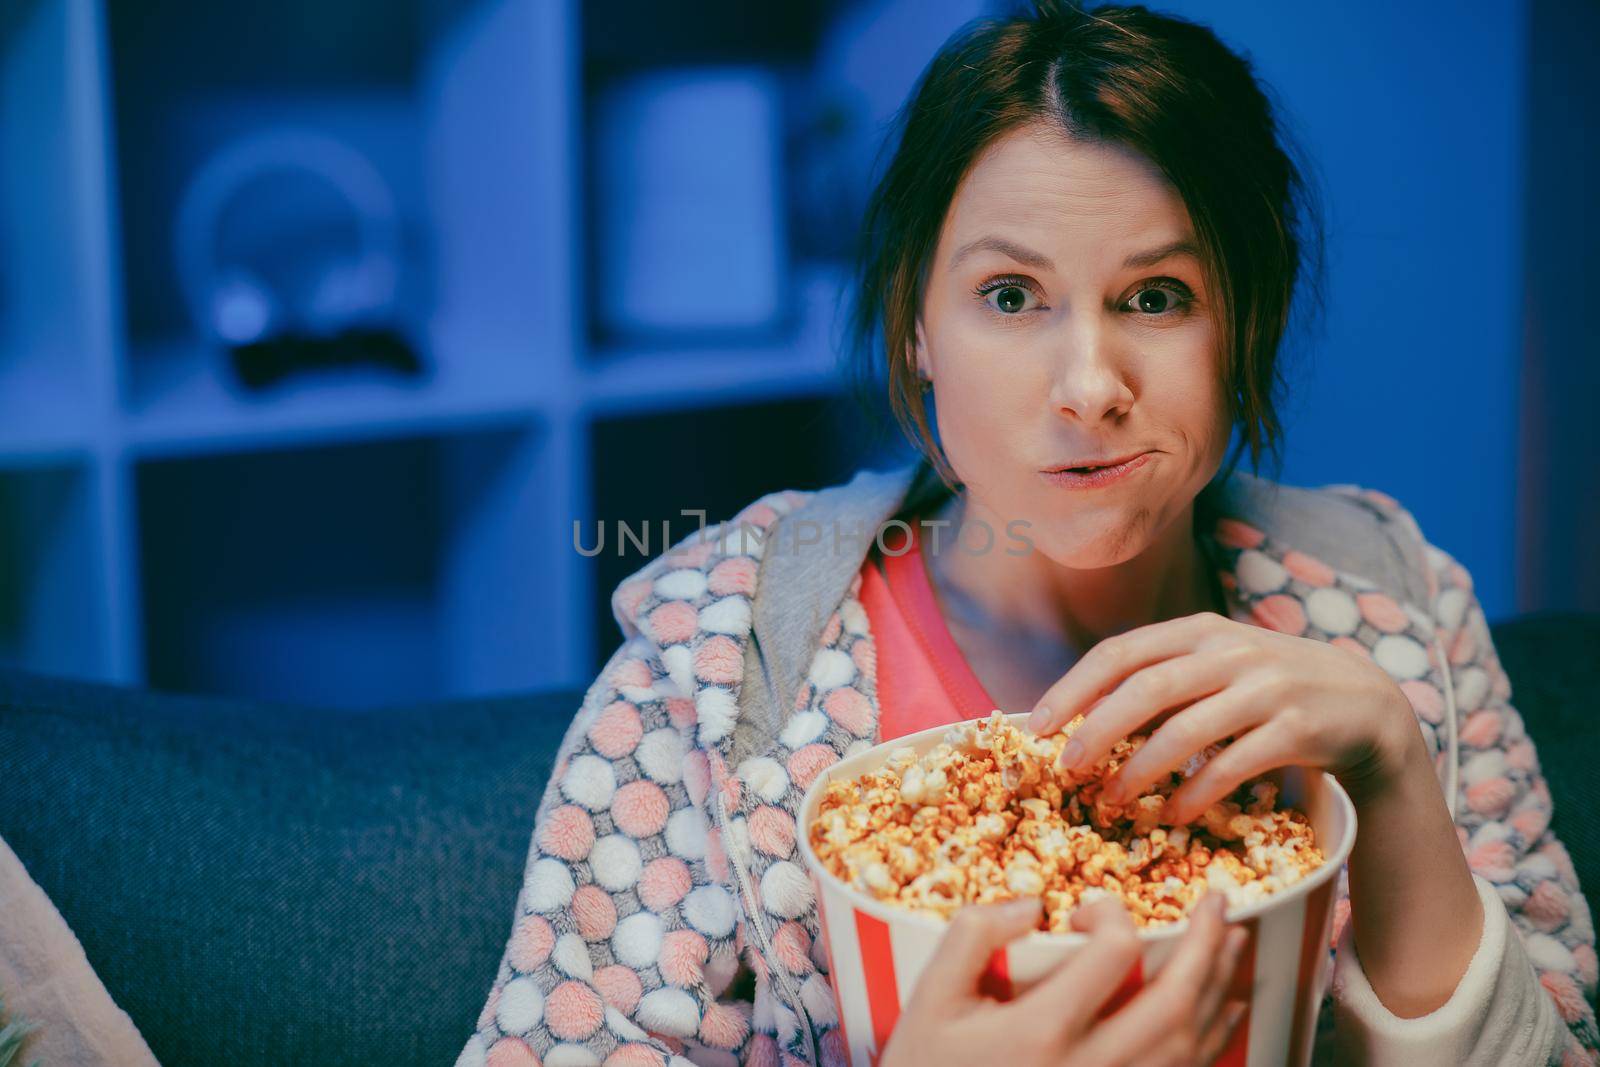 Young lady is watching TV laughing and eating popcorn having fun at home alone enjoying modern television. Youth lifestyle and cheerful people concept.